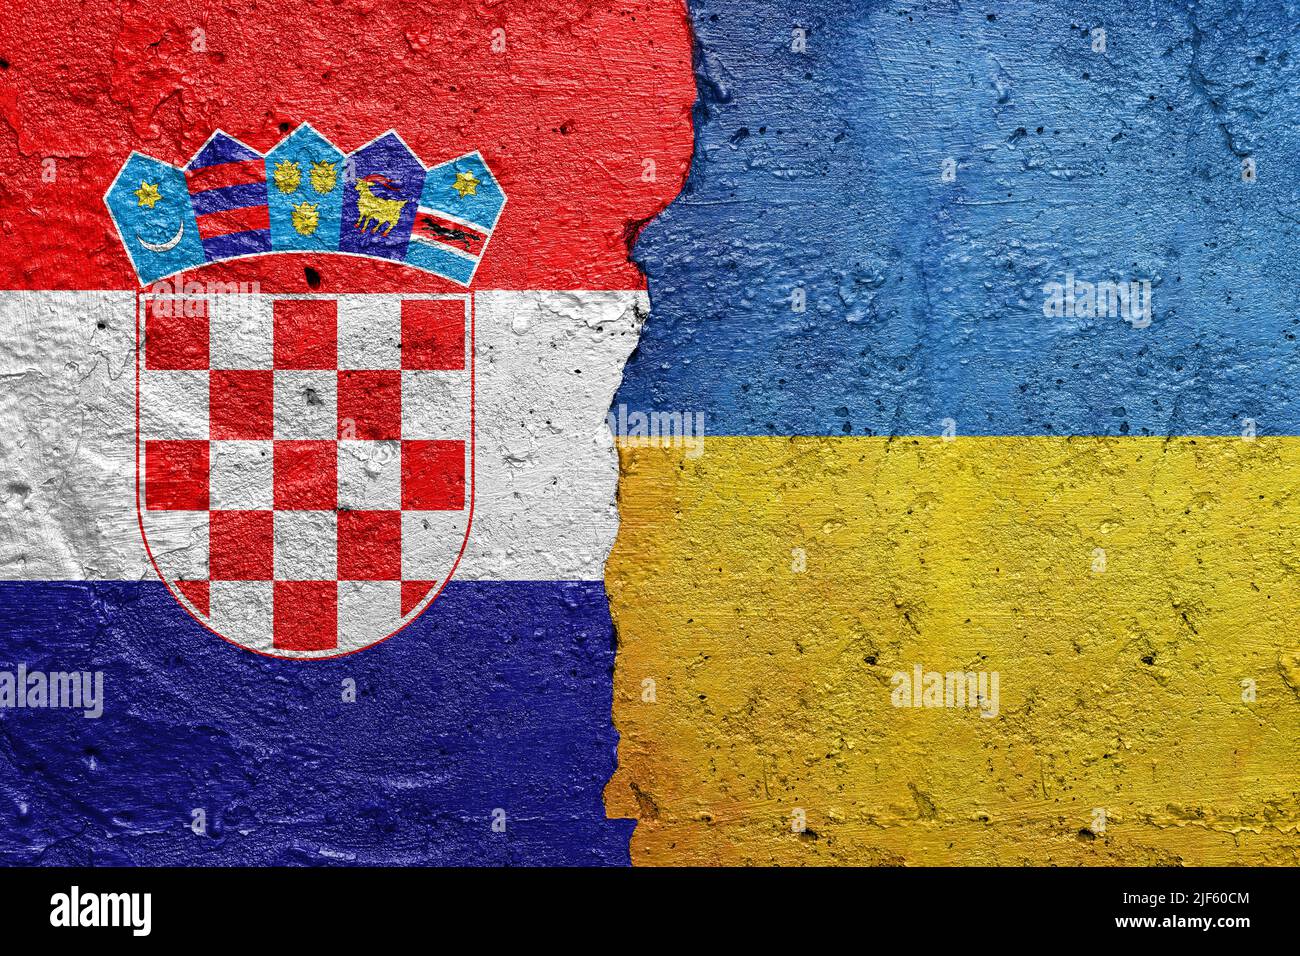 Croatia and Ukraine - Cracked concrete wall painted with a Croatian flag on the left and a Ukrainian flag on the right Stock Photo